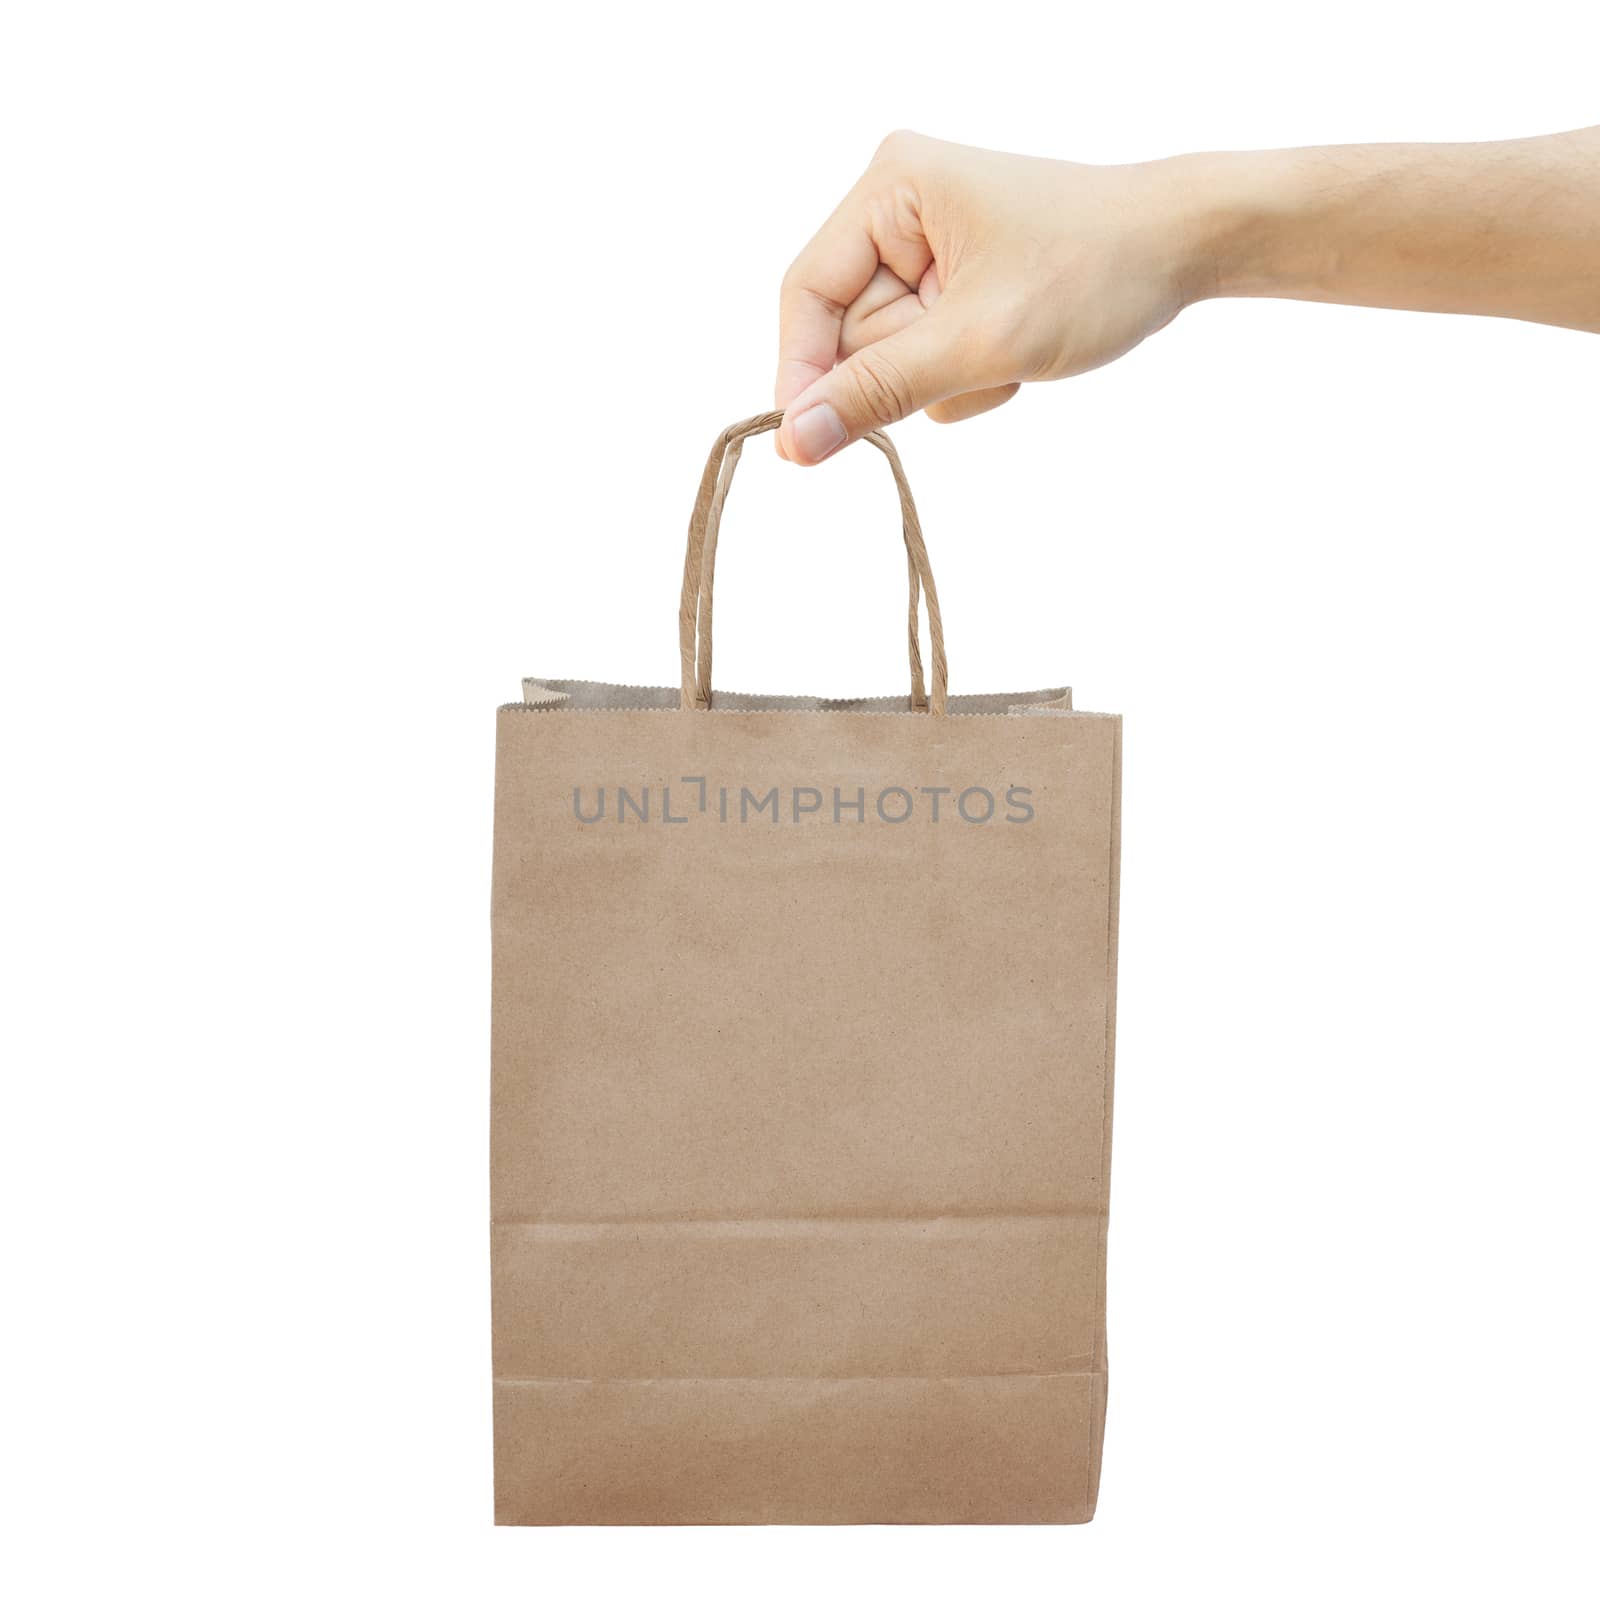 Hand With Paper Shopping Bag Isolated On White by 2nix